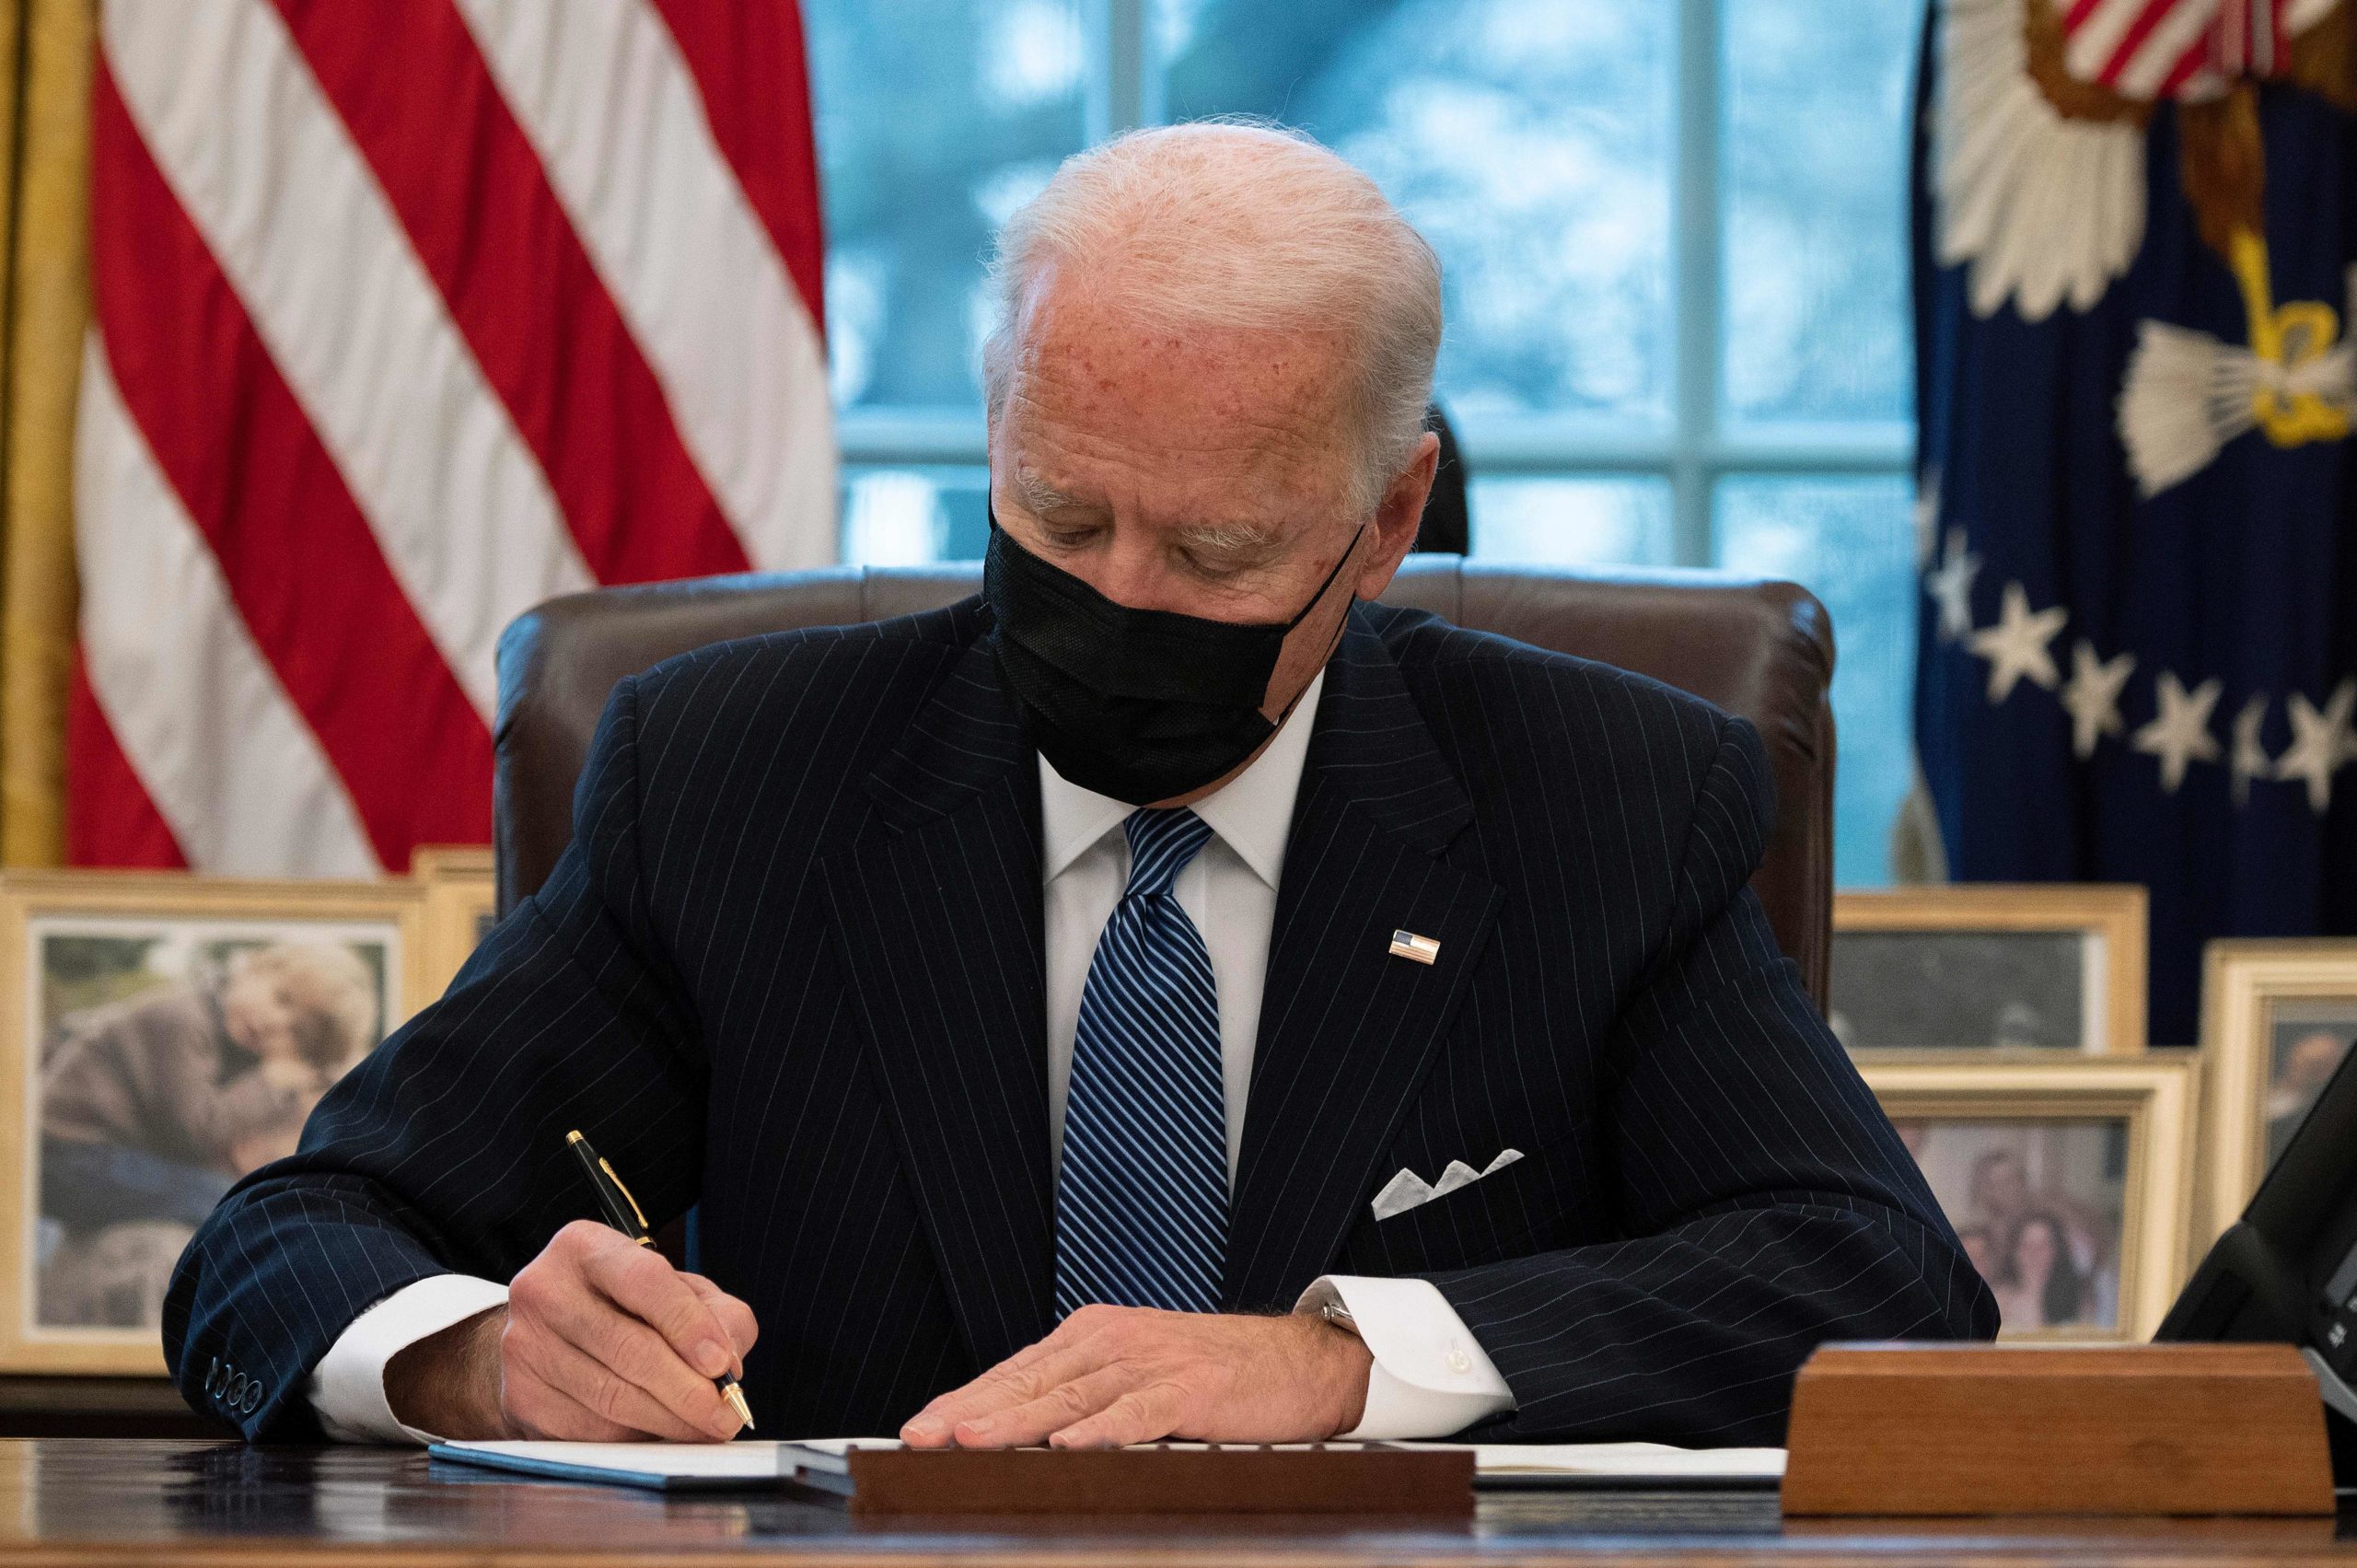 President Joe Biden signs an Executive Order reversing Trump era ban on Transgender serving in the military while in the Oval Office of the White House in Washington, DC, on January 25, 2021. (JIM WATSON/AFP via Getty Images)